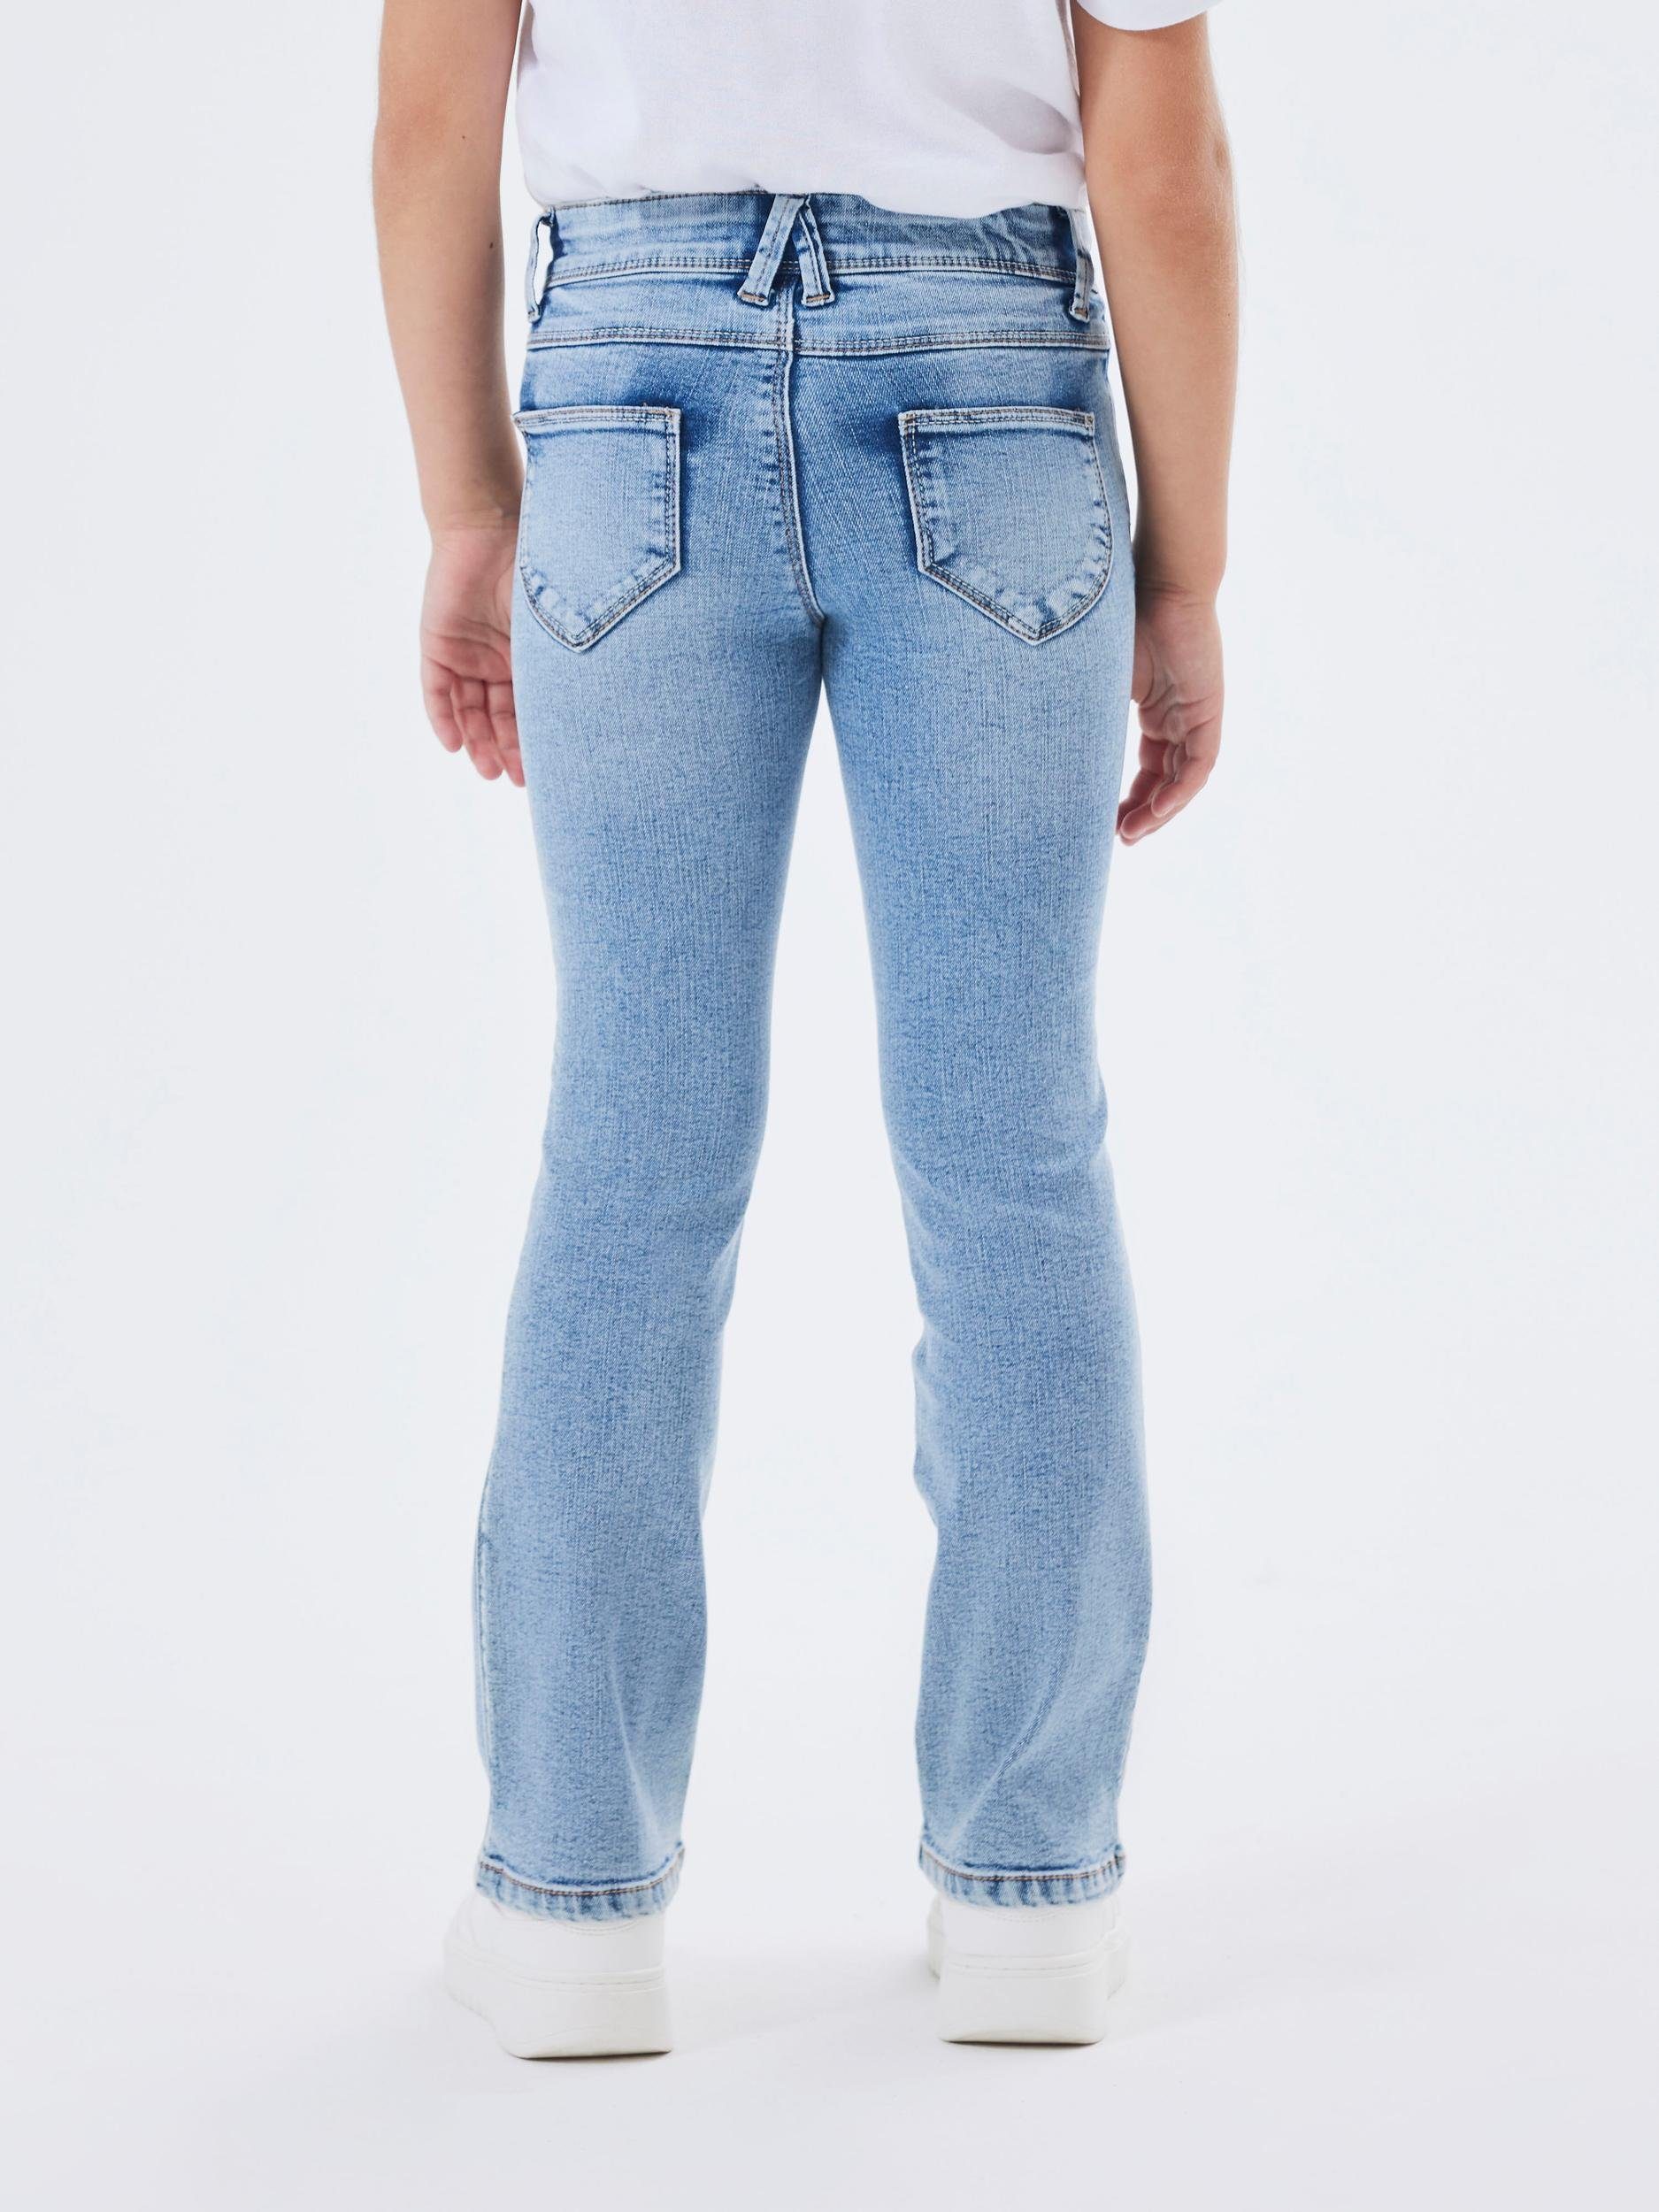 Name It Bootcut-Jeans NKFPOLLY mit BOOT Denim JEANS NOOS SKINNY Blue Light Stretch 1142-AU